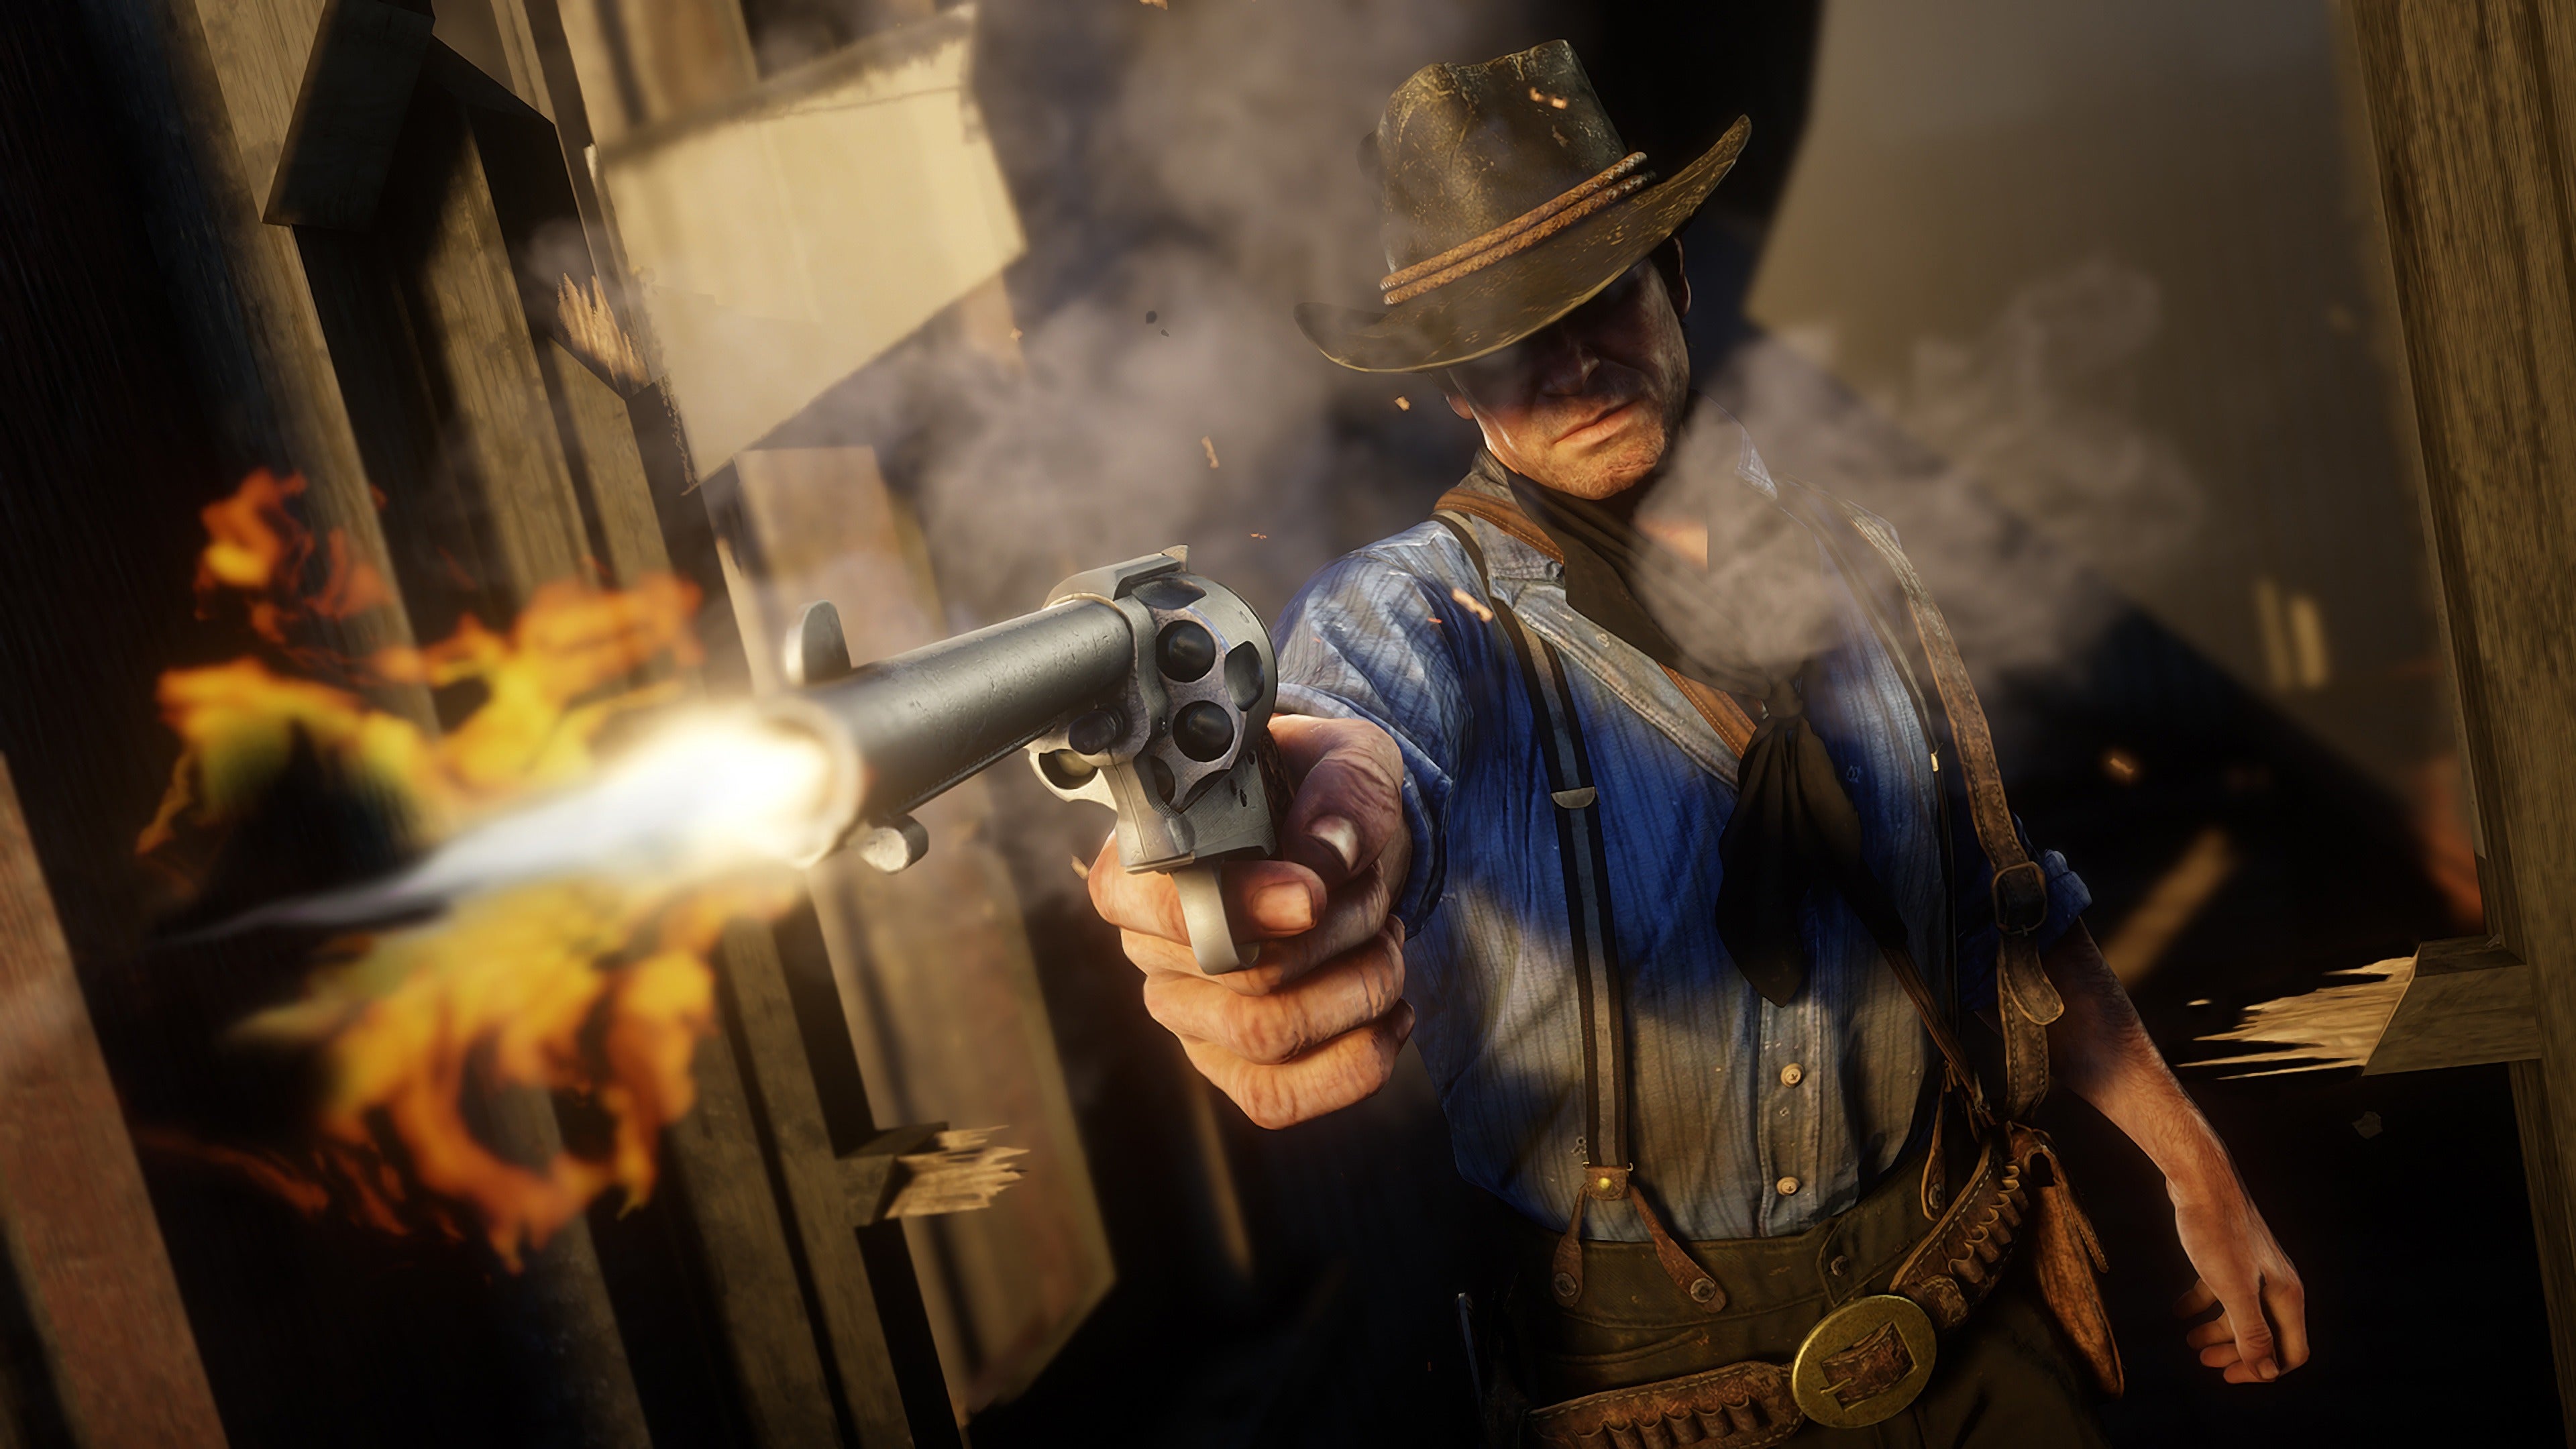 Image for Red Dead Redemption 2 PC: Every Graphics Setting Tested + Xbox One X Comparison